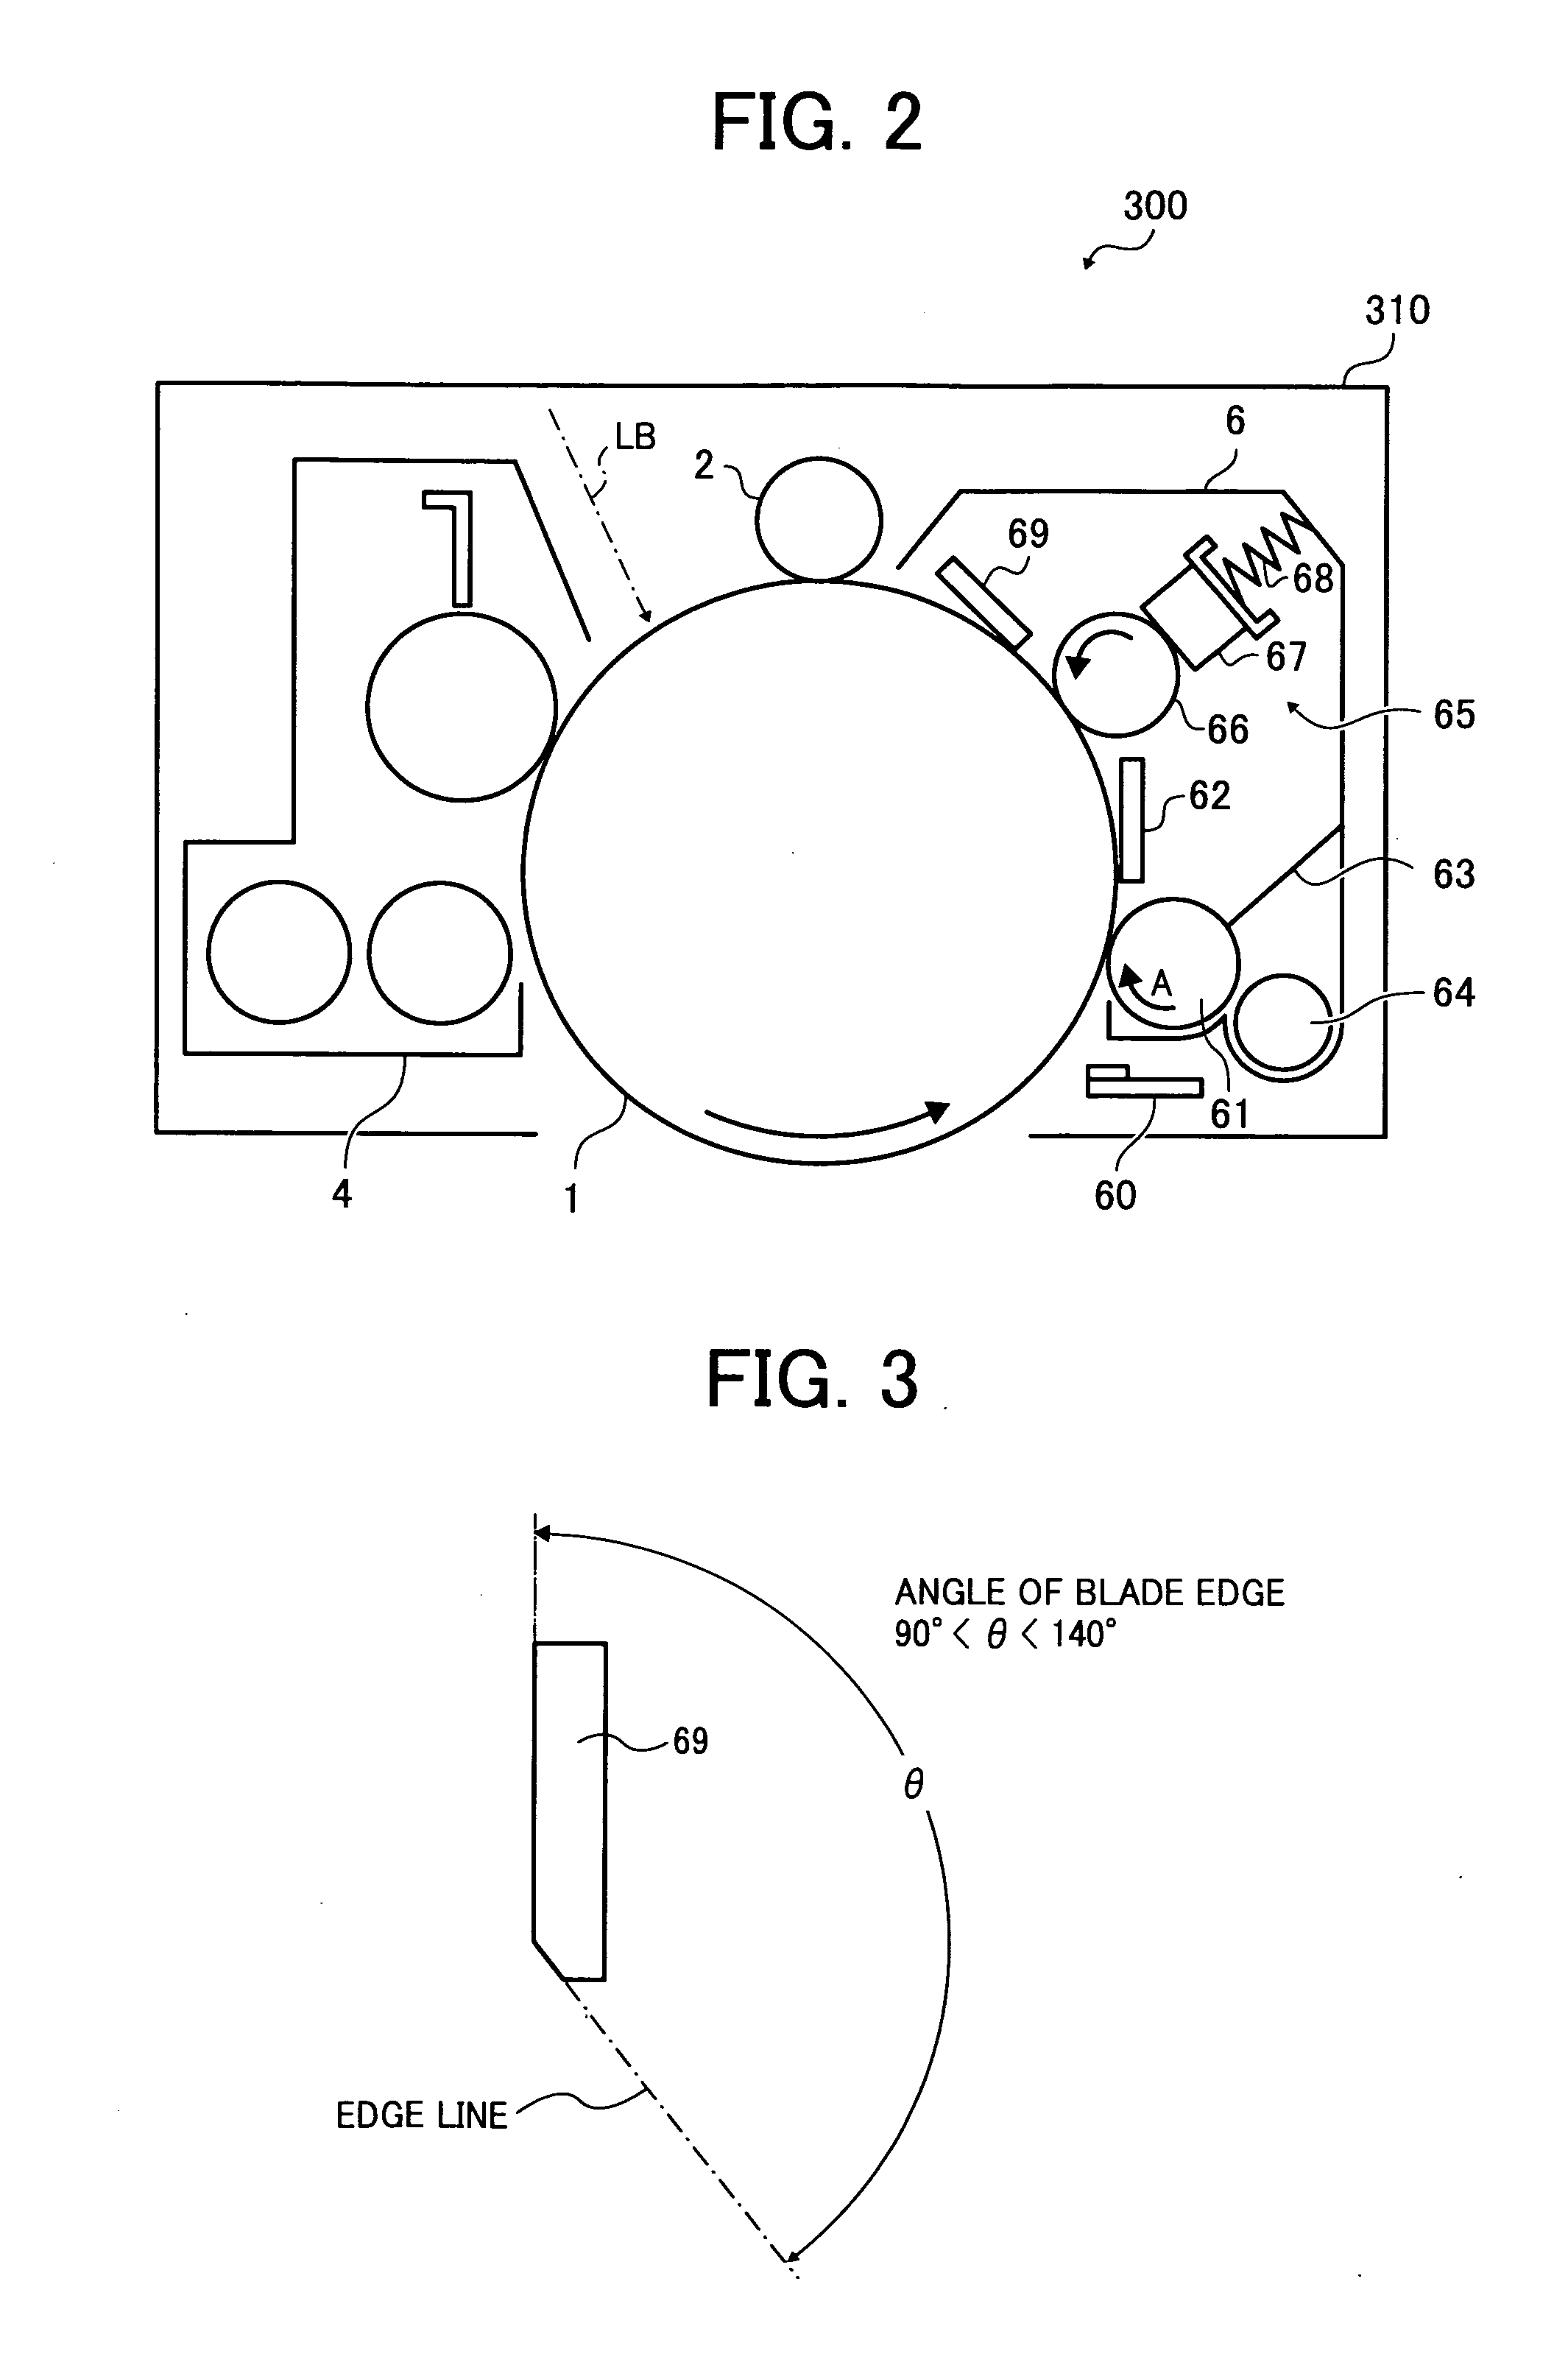 Lubricant applicator, image forming apparatus, and process cartridge